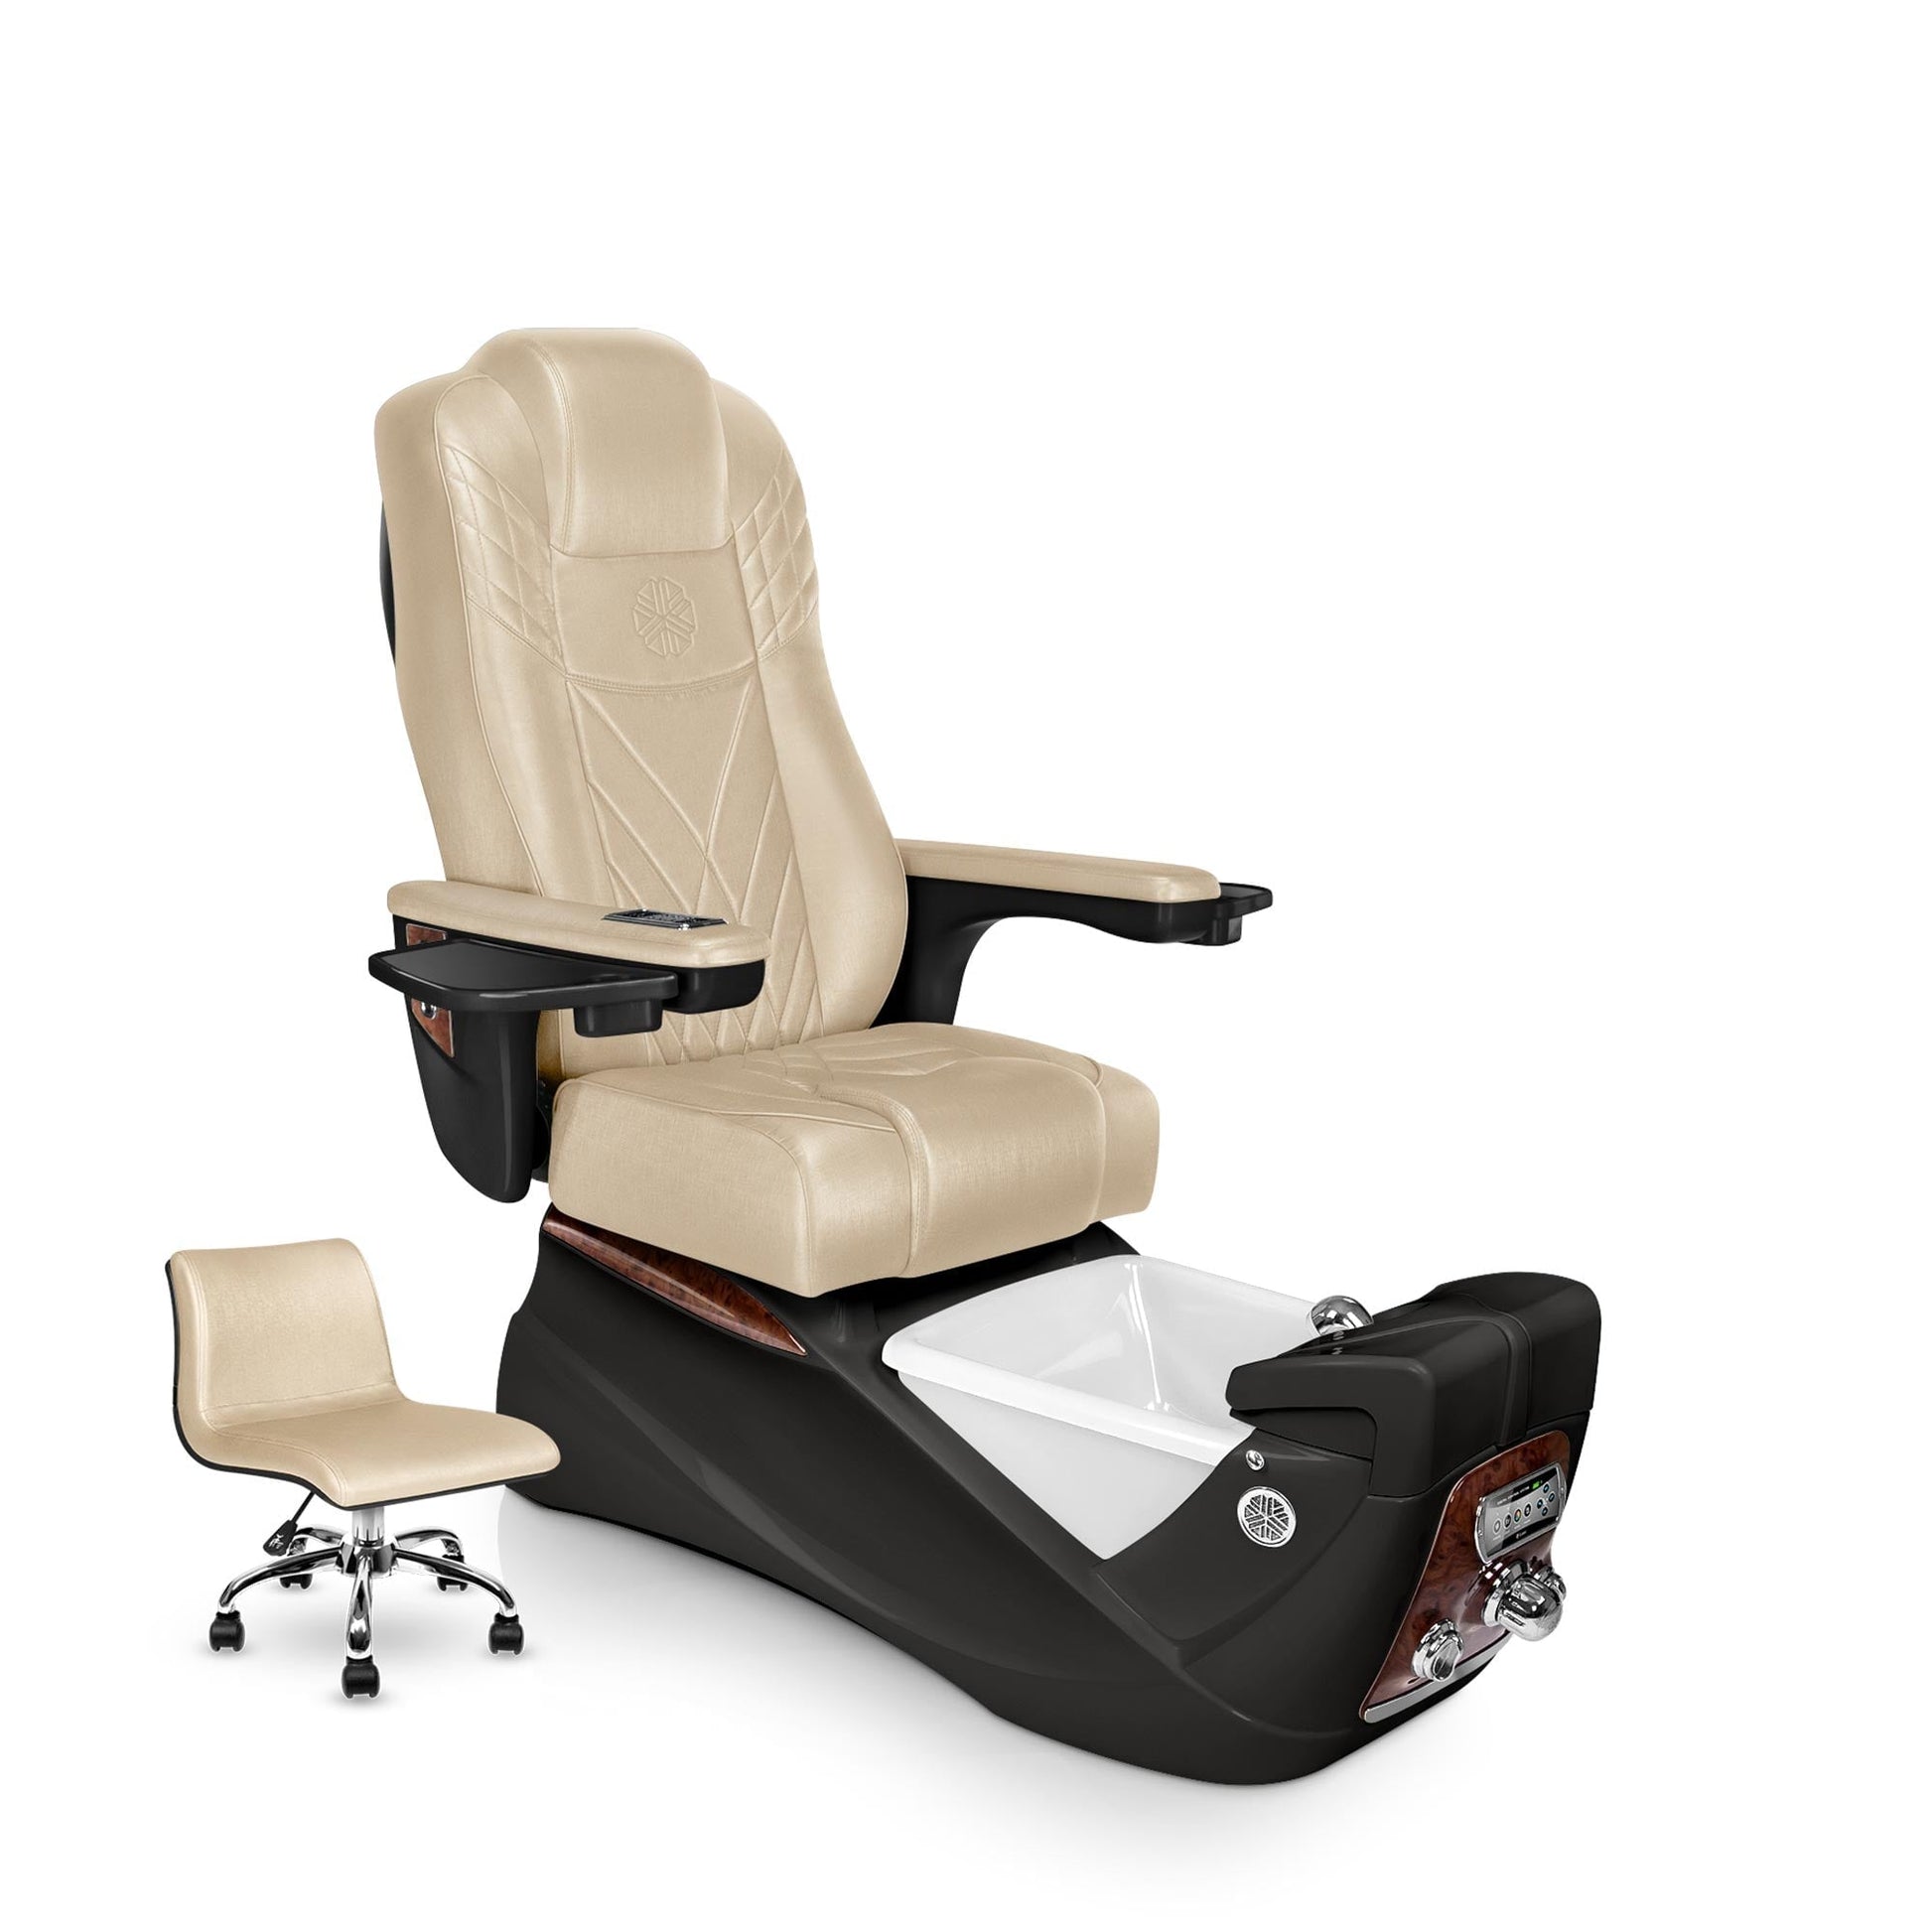 Lexor INFINITY pedicure chair with glazed gold cushion and espresso spa base